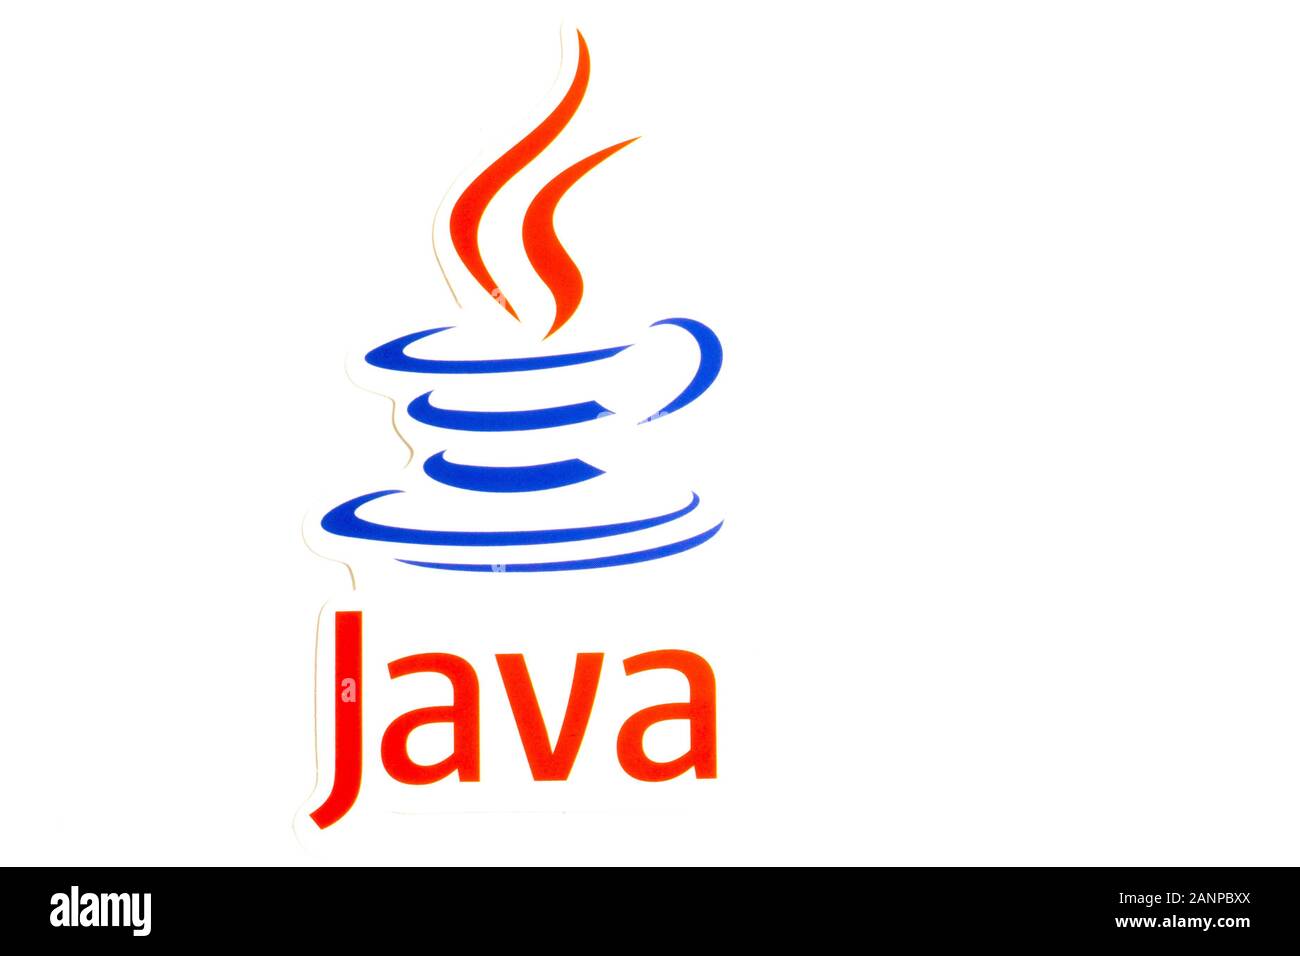 Los Angeles, California, USA - 17 January 2020: Java logo on white background and copy space, Illustrative Editorial Stock Photo